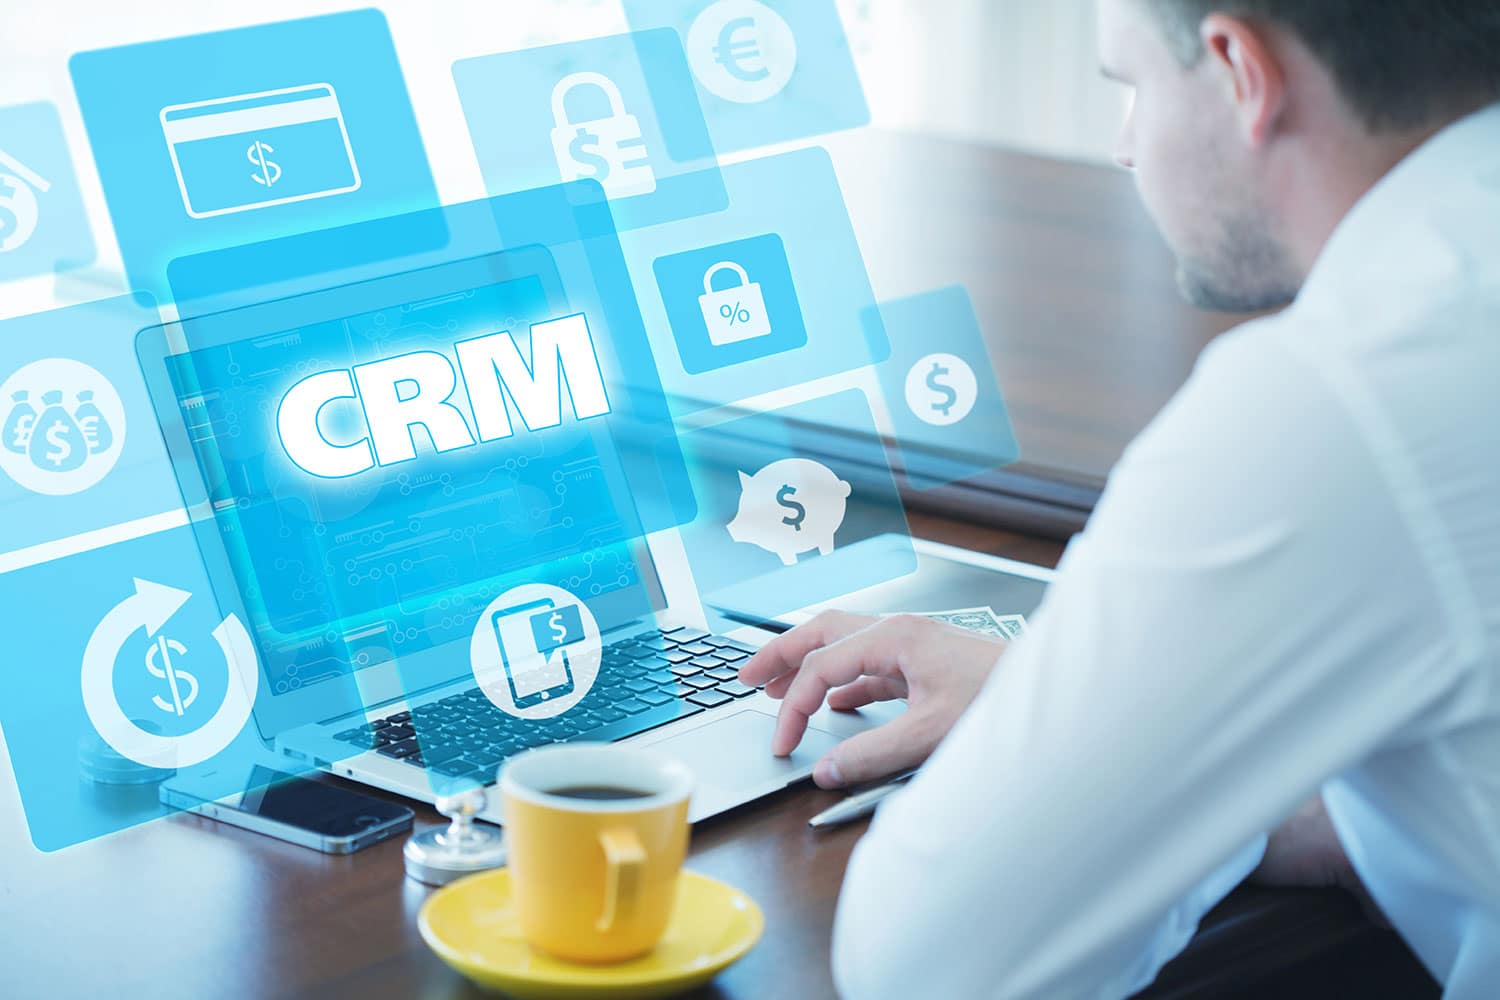 What Are The Benefits Of CRM?